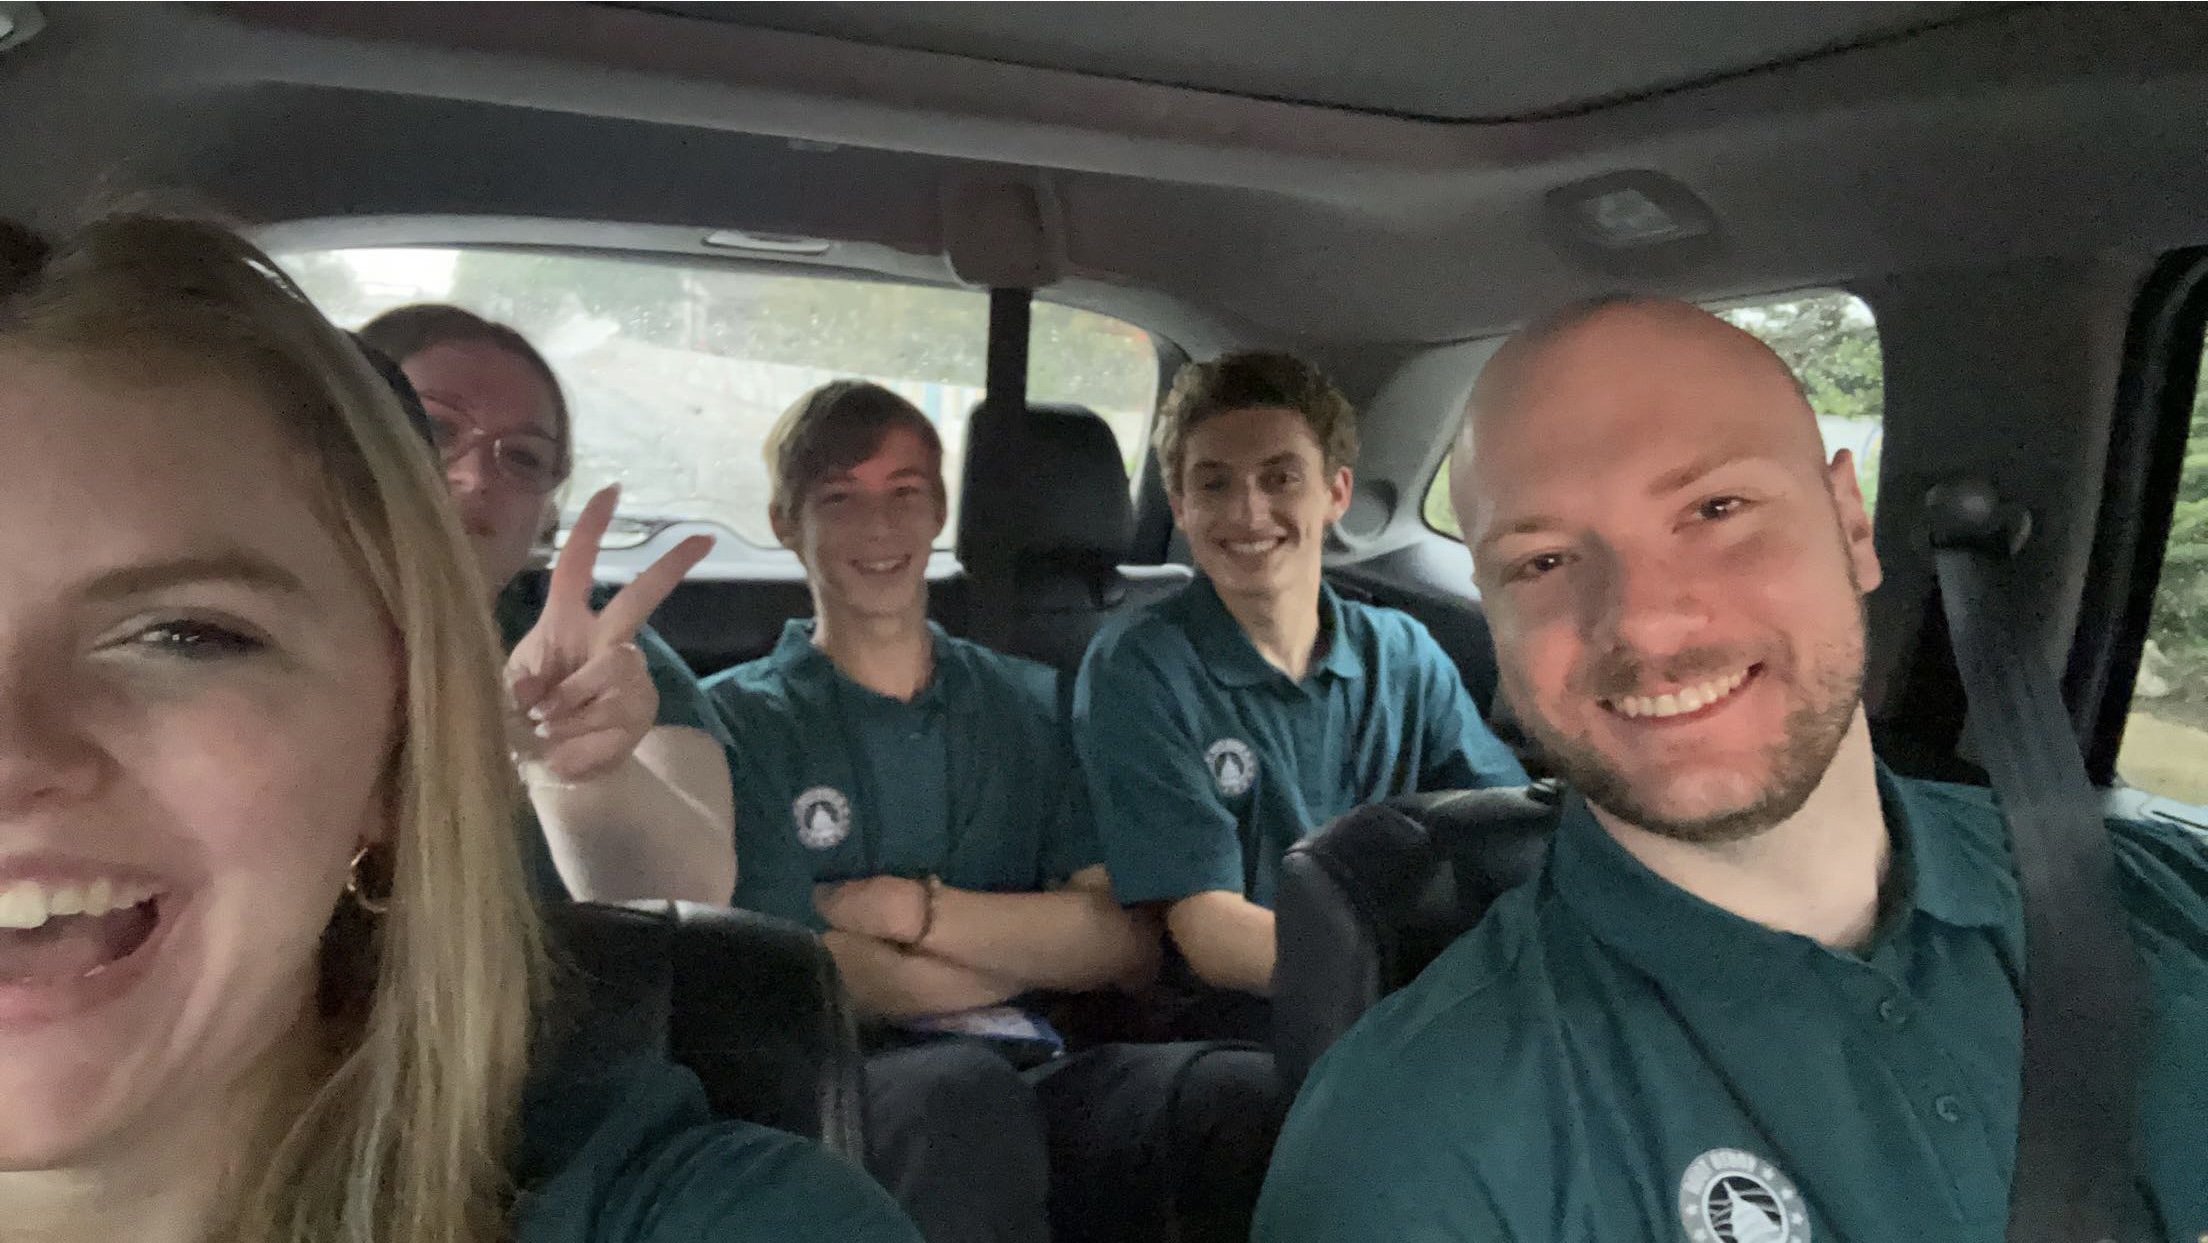 Pictured: From left to right, NJ Youth Tour students Maddie Kappelmeier, Bethann Juhr, Isaac Schuman, and Dylan Barca, with chaperone Steve Sokolowski, on their way to Capitol Hill.